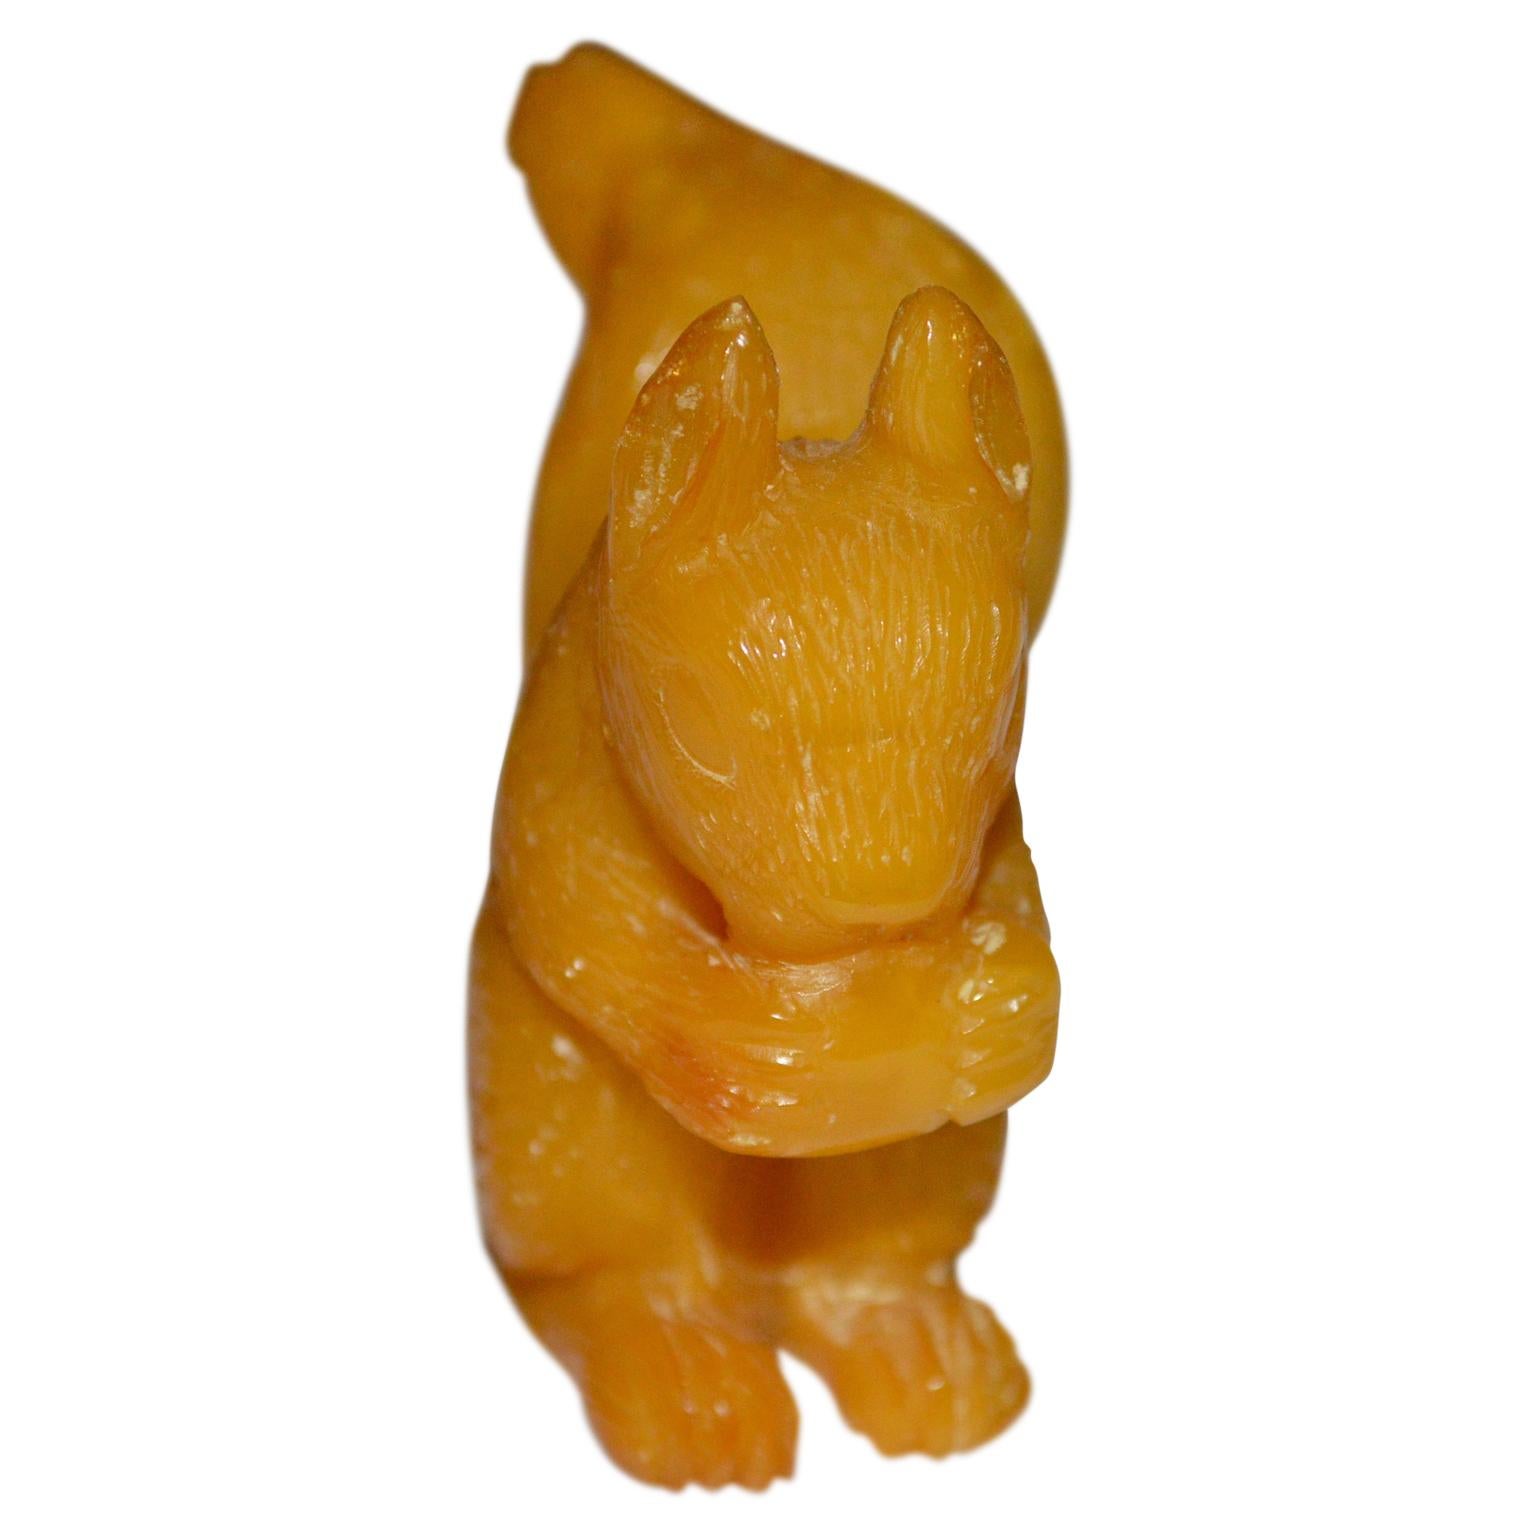 Miniature carved squirrel from light colored natural amber (not resin as the material list is listing)